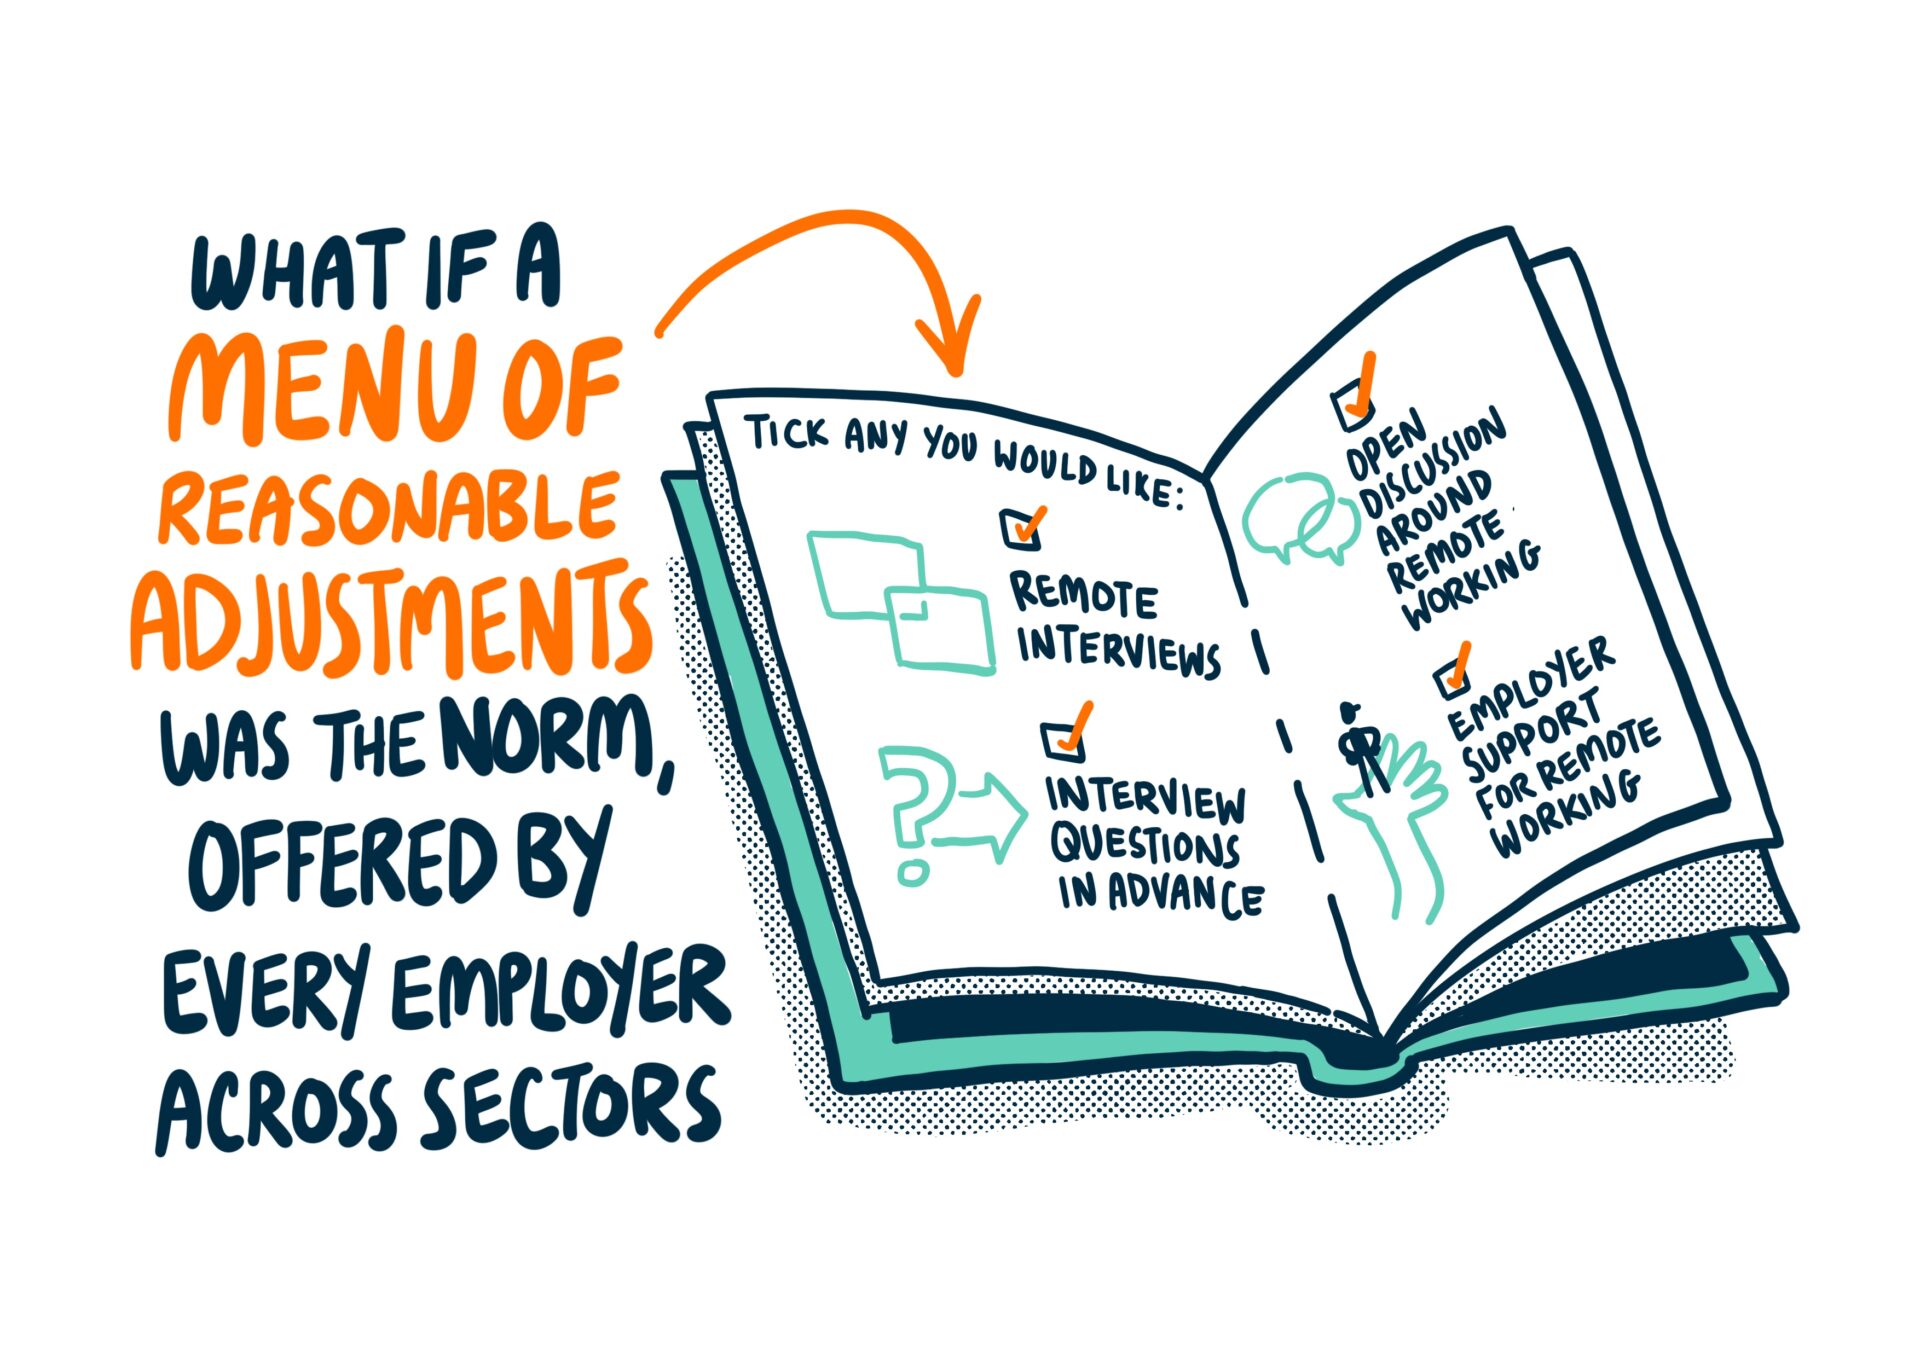 A cartoon of a booklet with text on the inside pages listing different reasonable adjustments next to tick boxes